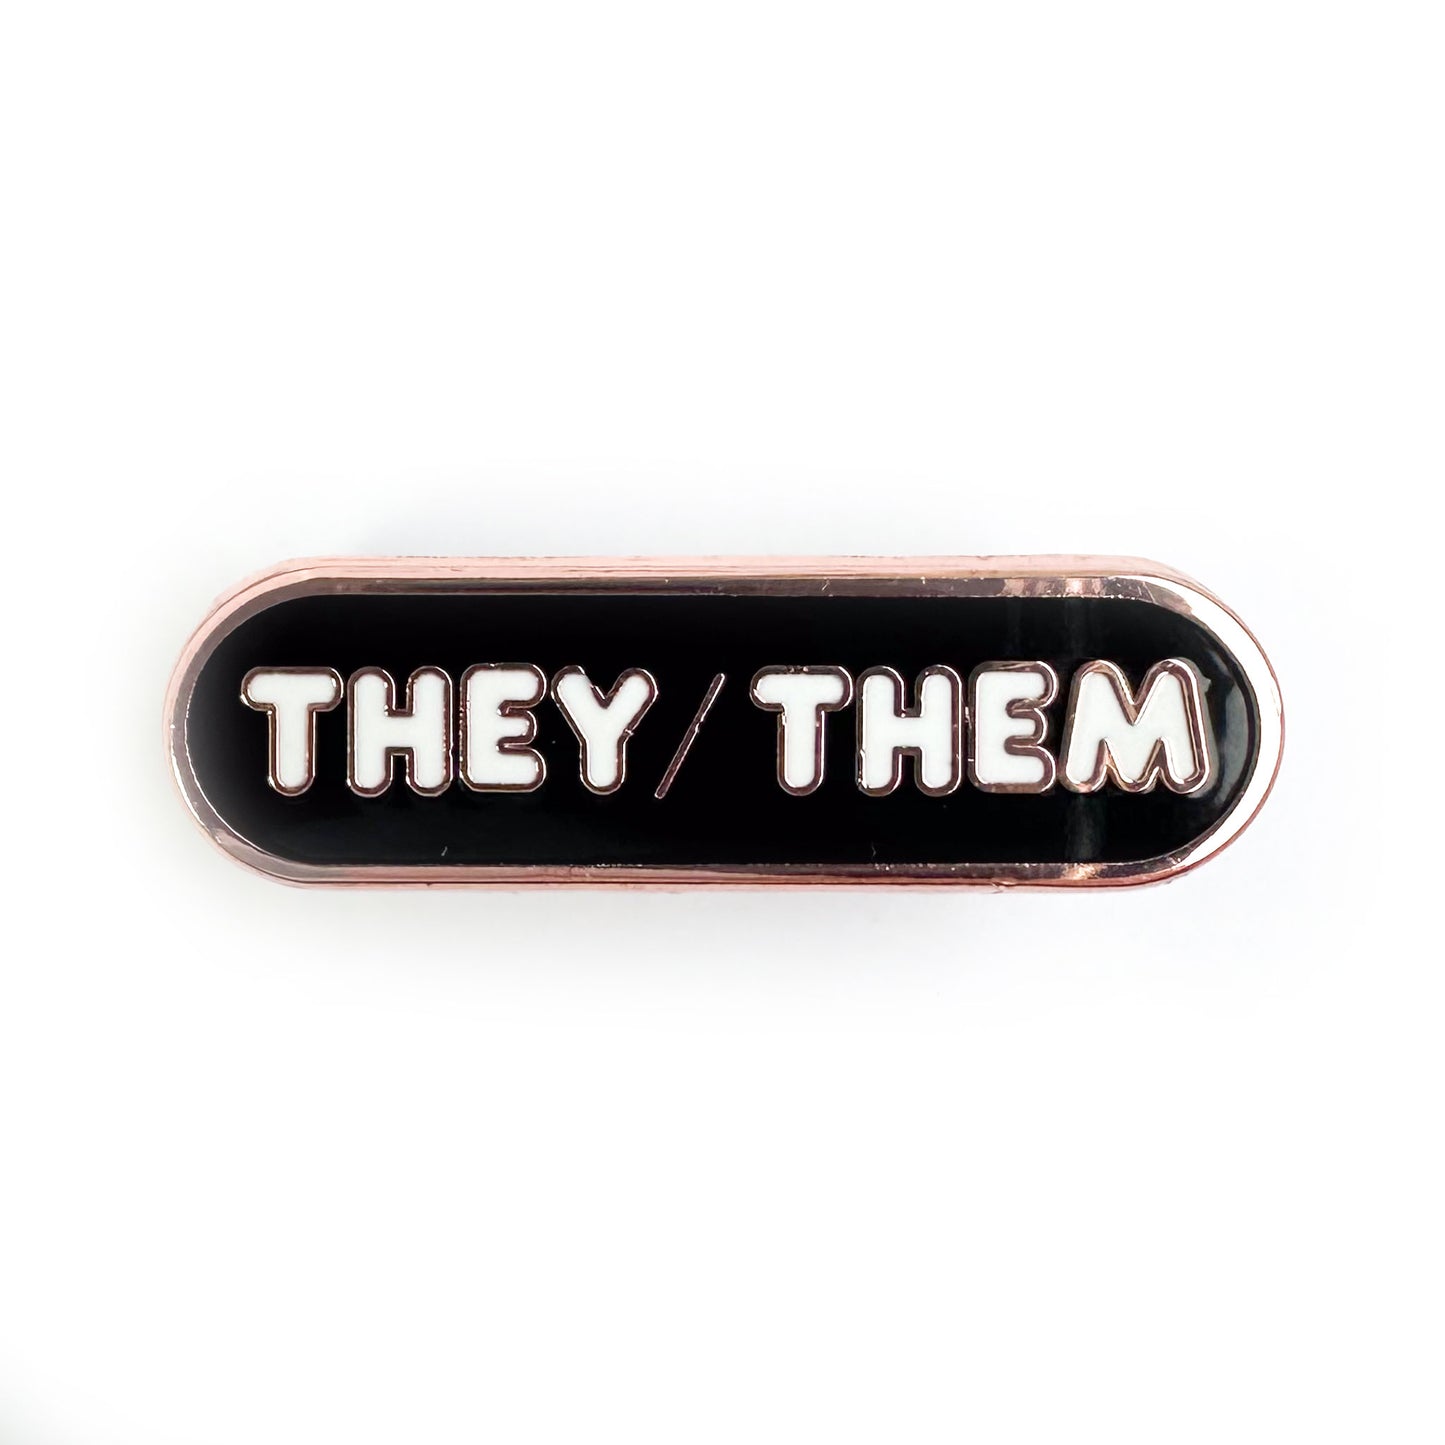 A black capsule shaped pin with white bubble letters that spell "They/Them" on it. 